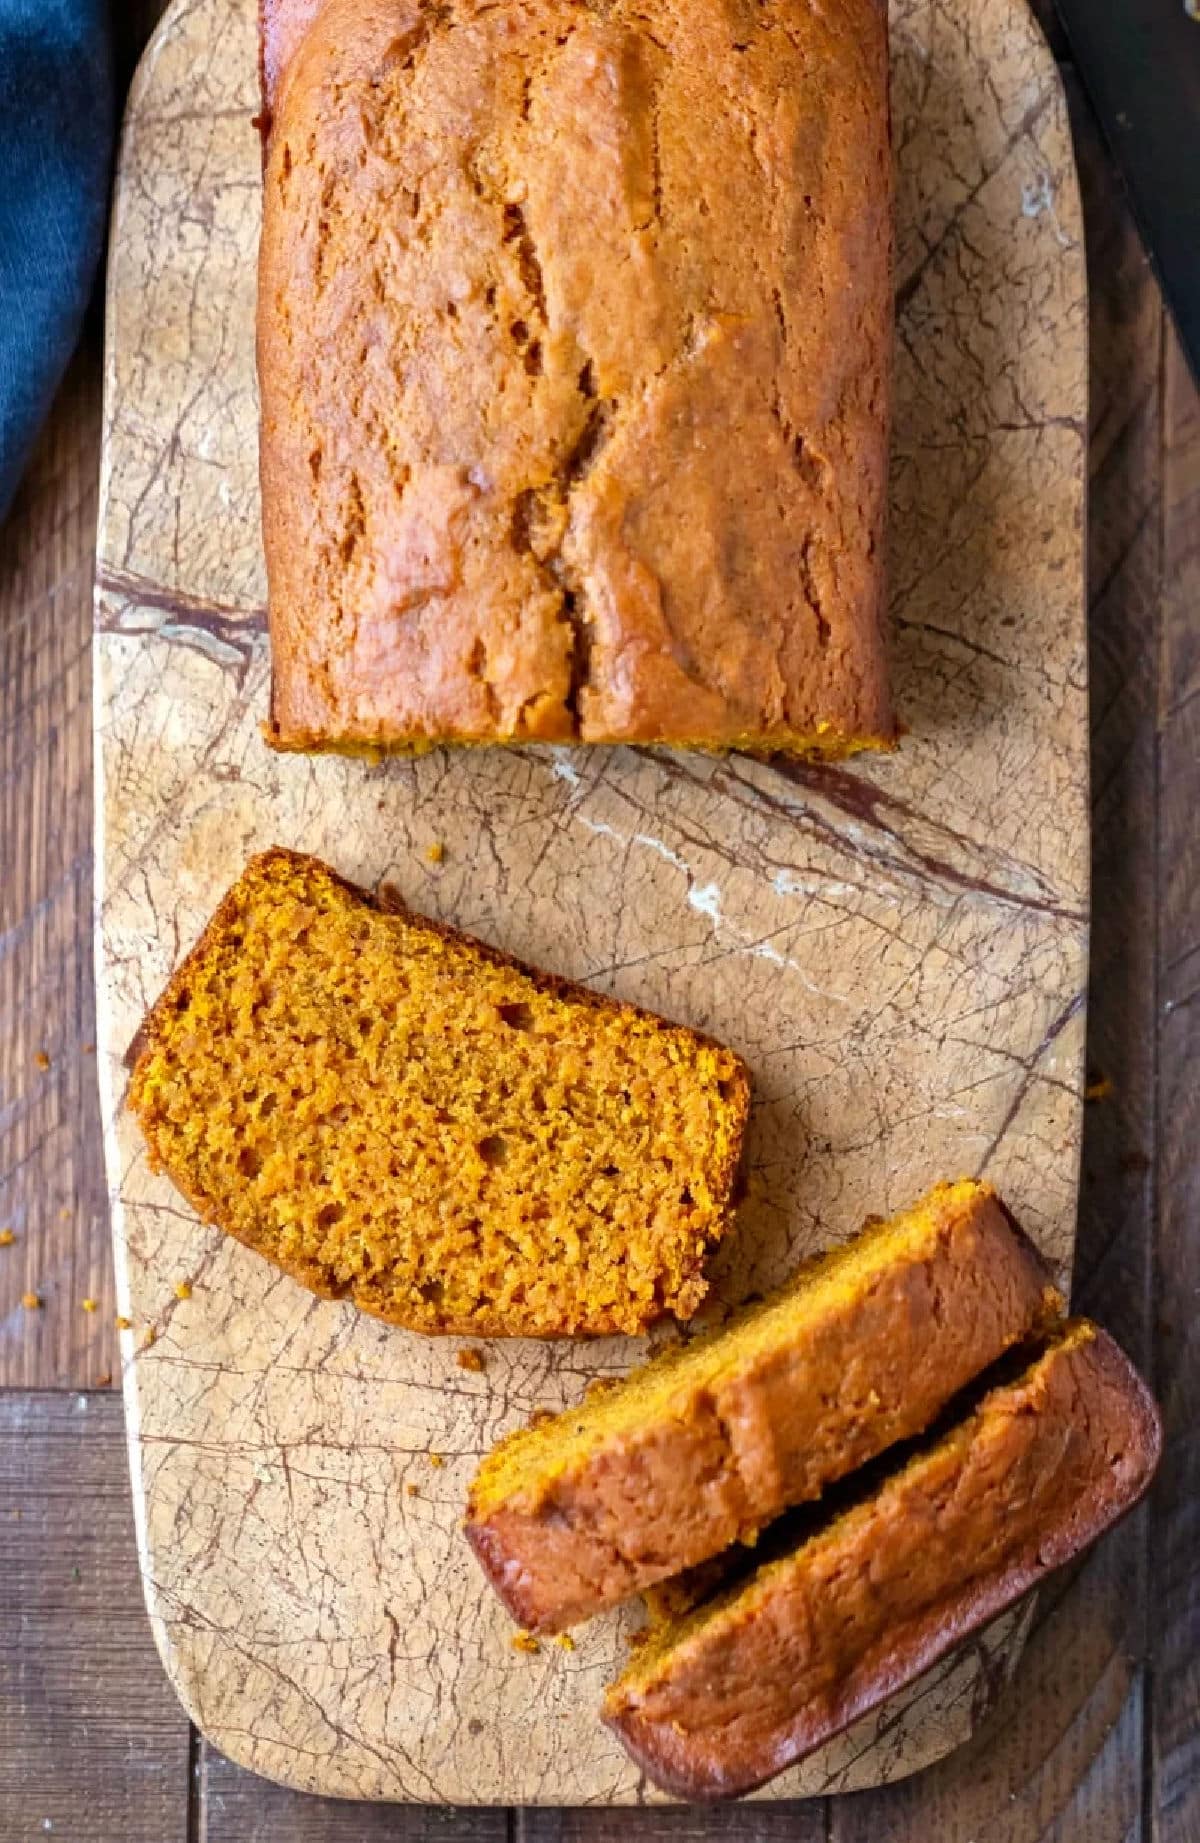 Three slices of pumpkin bread next to the loaf.